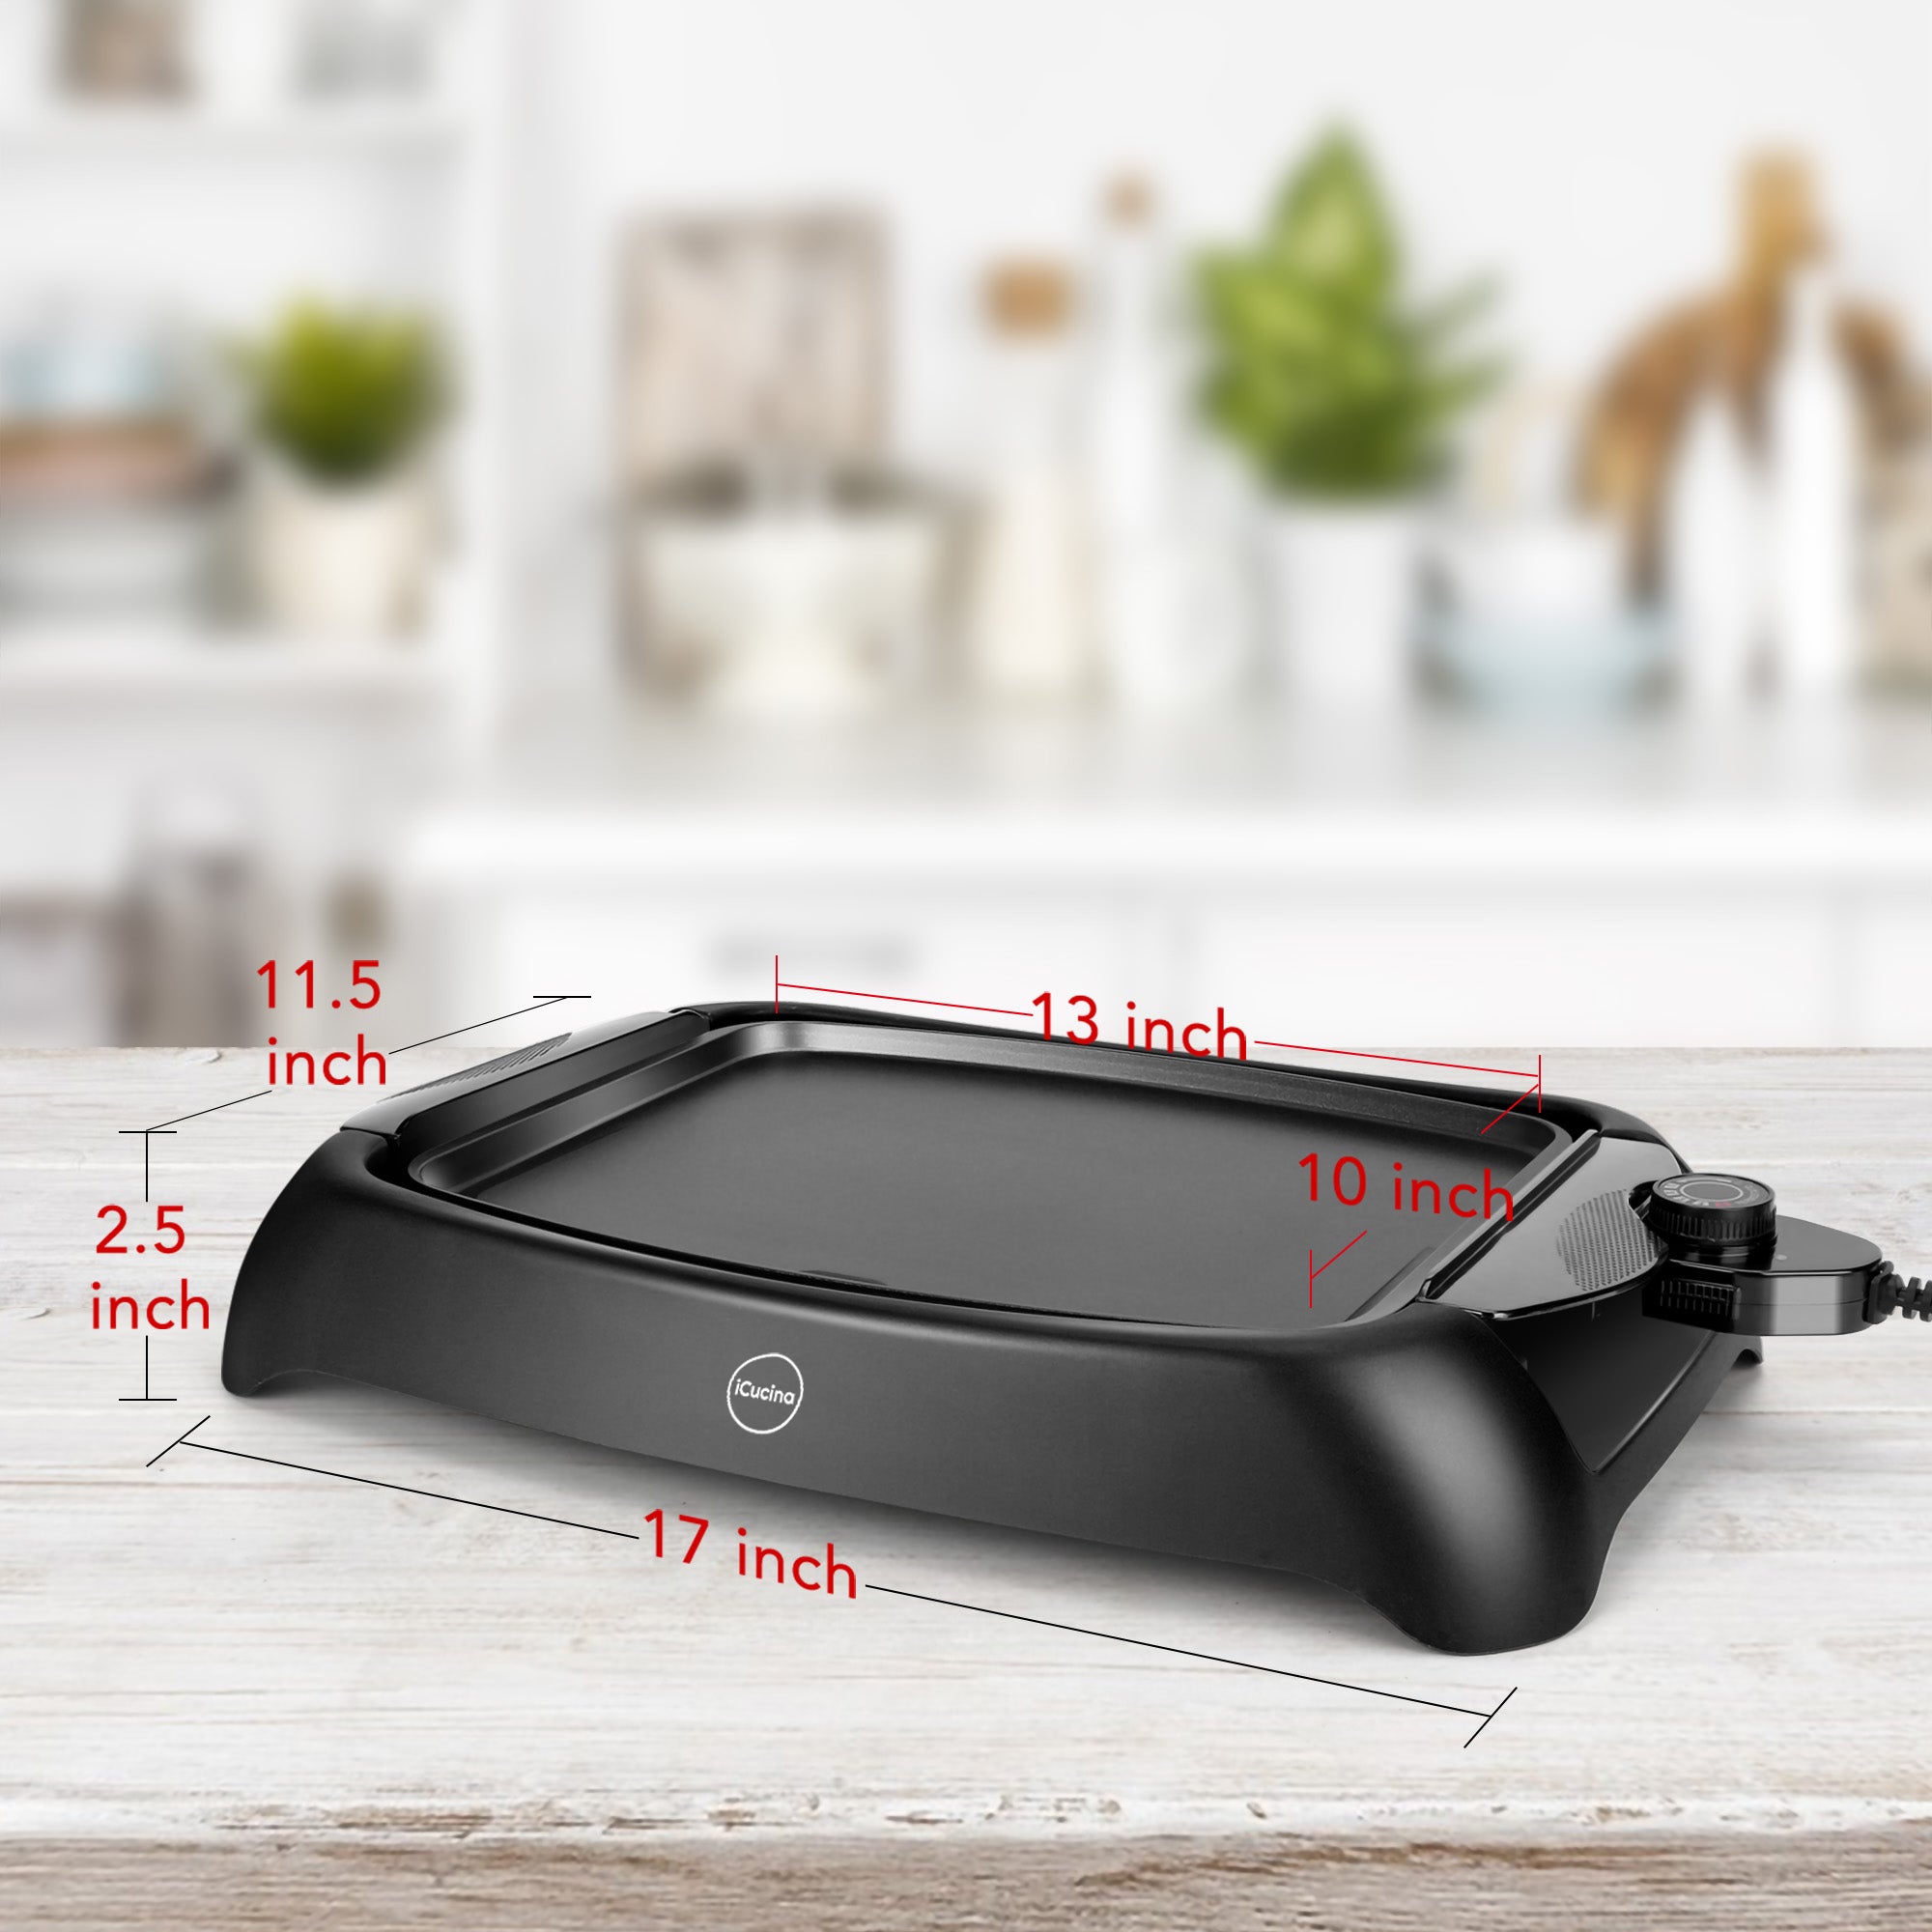 iCucina Flat Electric Griddle Nonstick for Pancakes, Eggs, Quesadillas, Electric Indoor Kitchen Griddle with A Fully Immersible